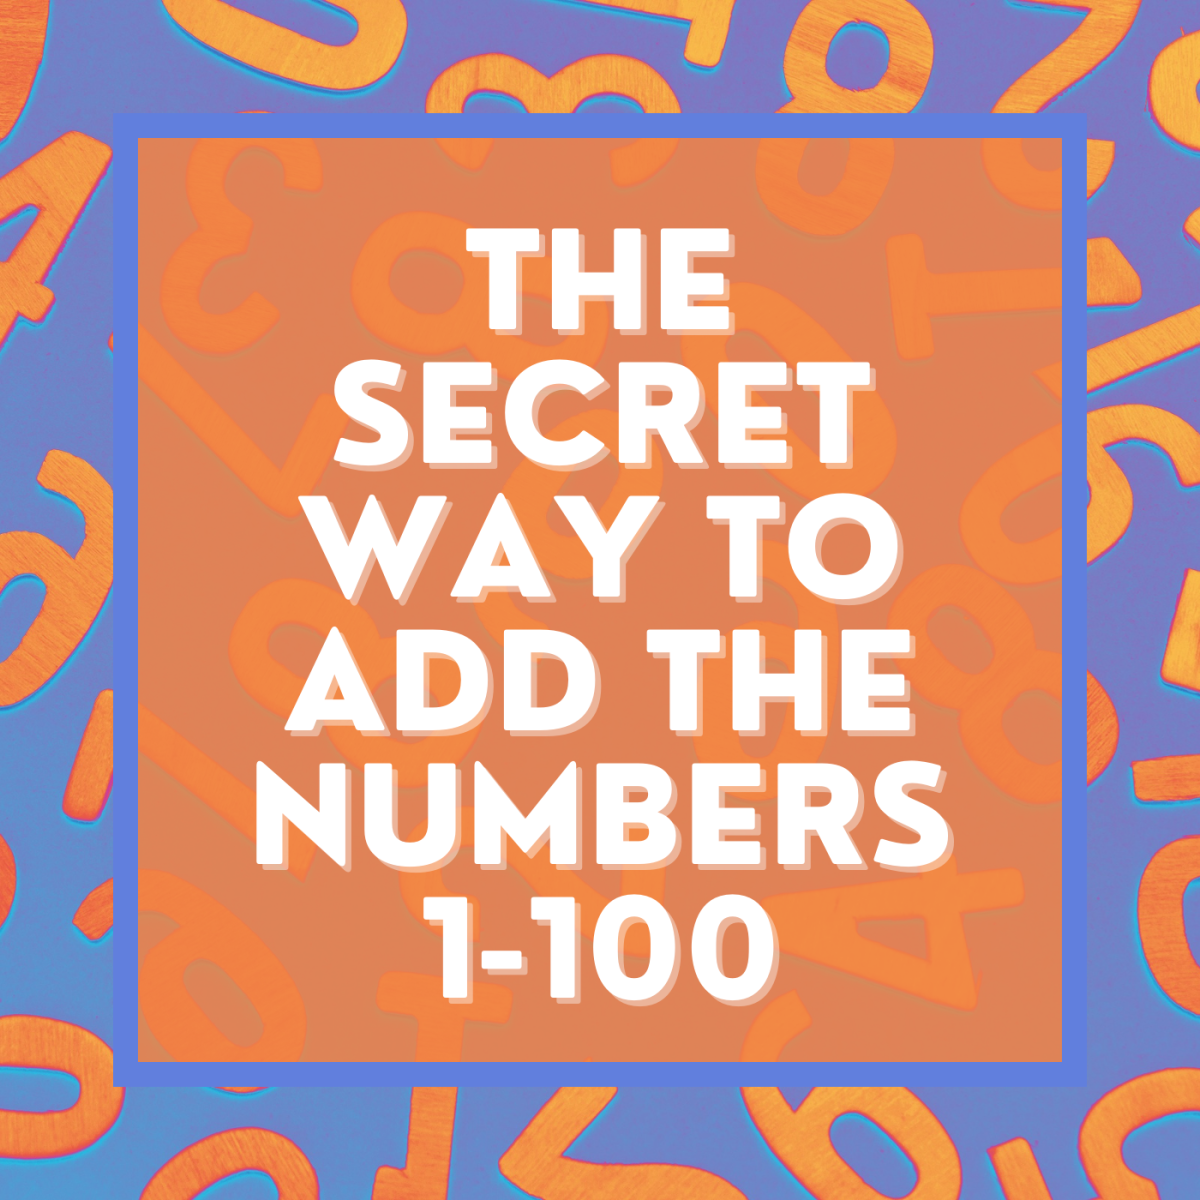 How to add the numbers 1-100